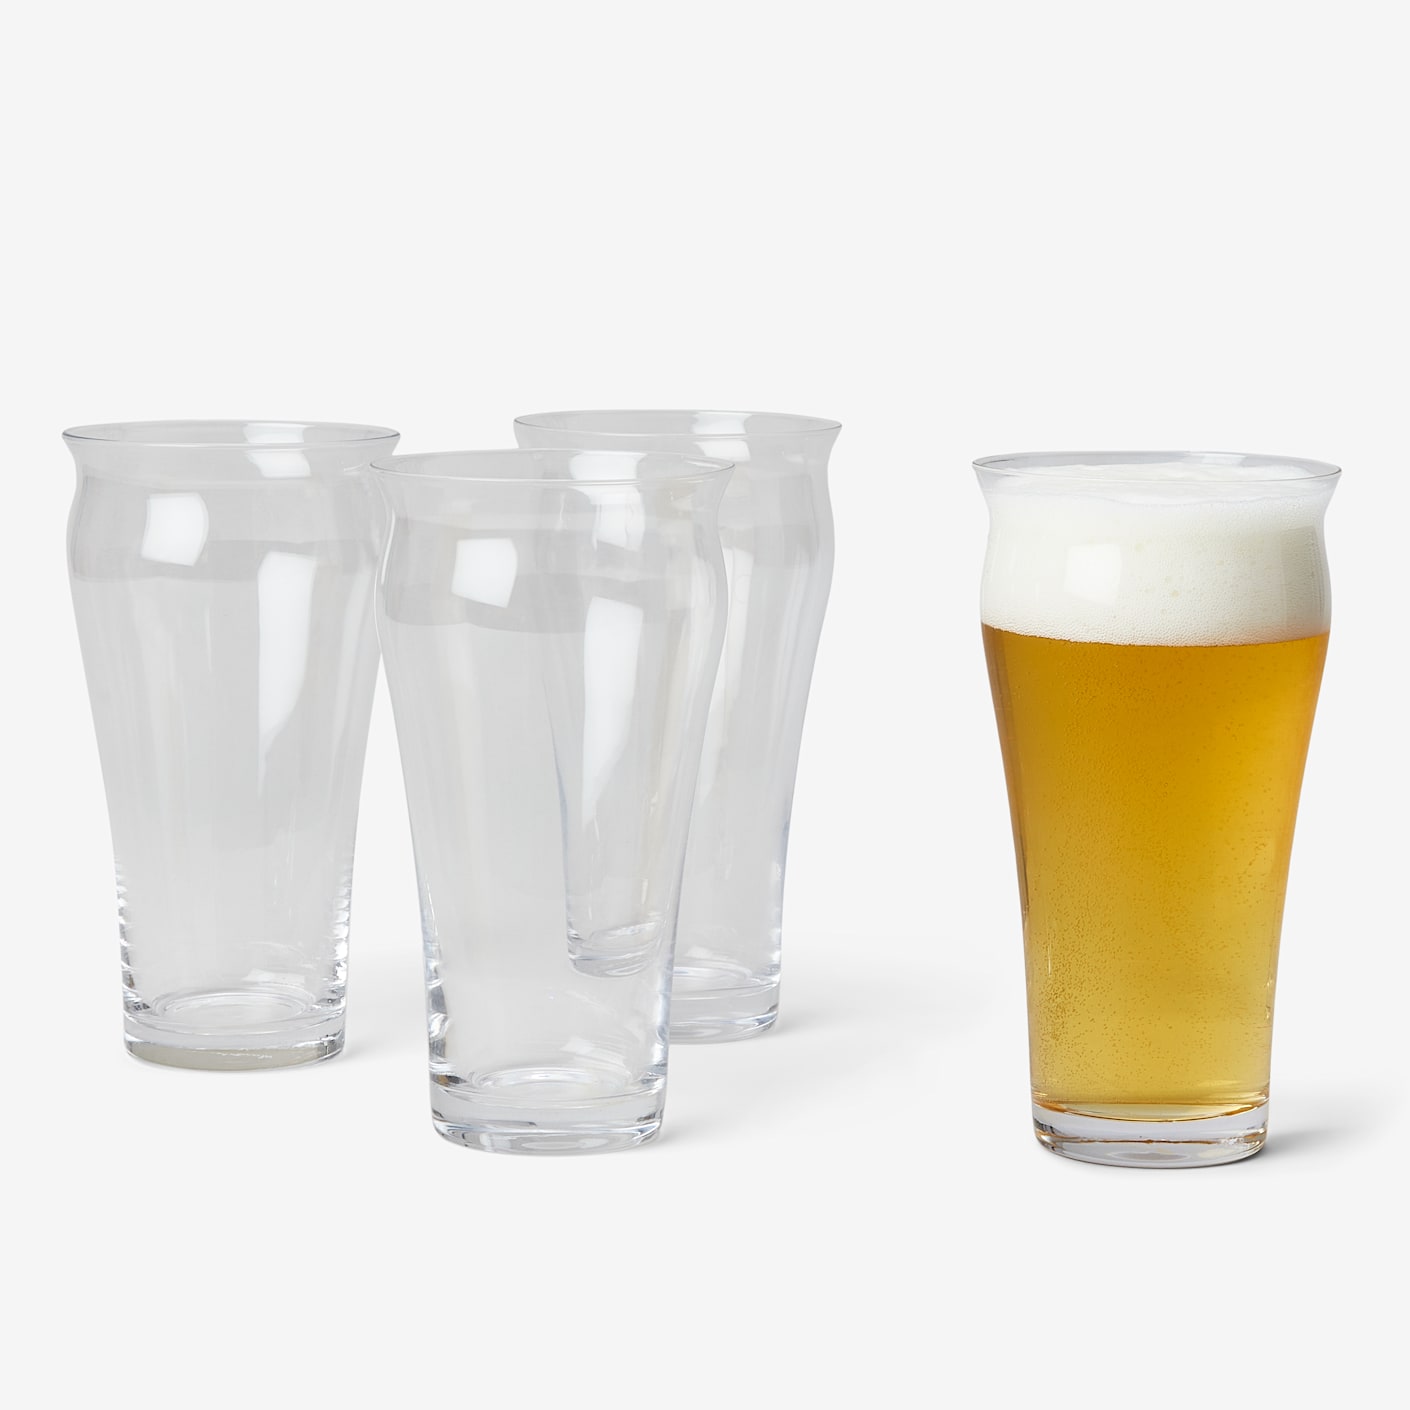 Final Touch Brewhouse Beer Glasses – set of 4 | Bespoke Post